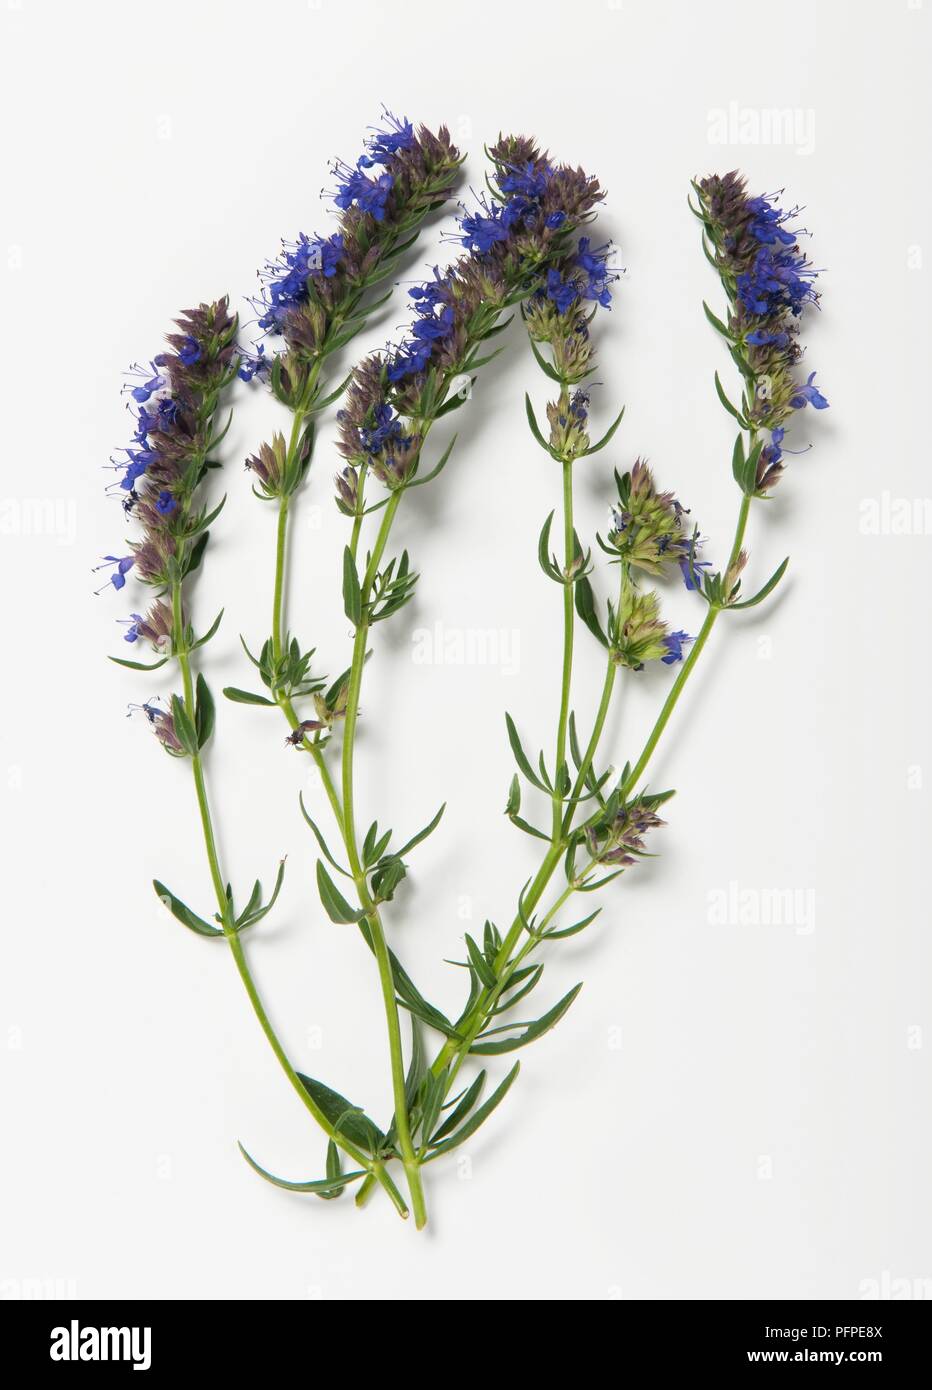 Hyssopus officinalis (Herb hyssop) stems with leaves and blue flowers Stock Photo